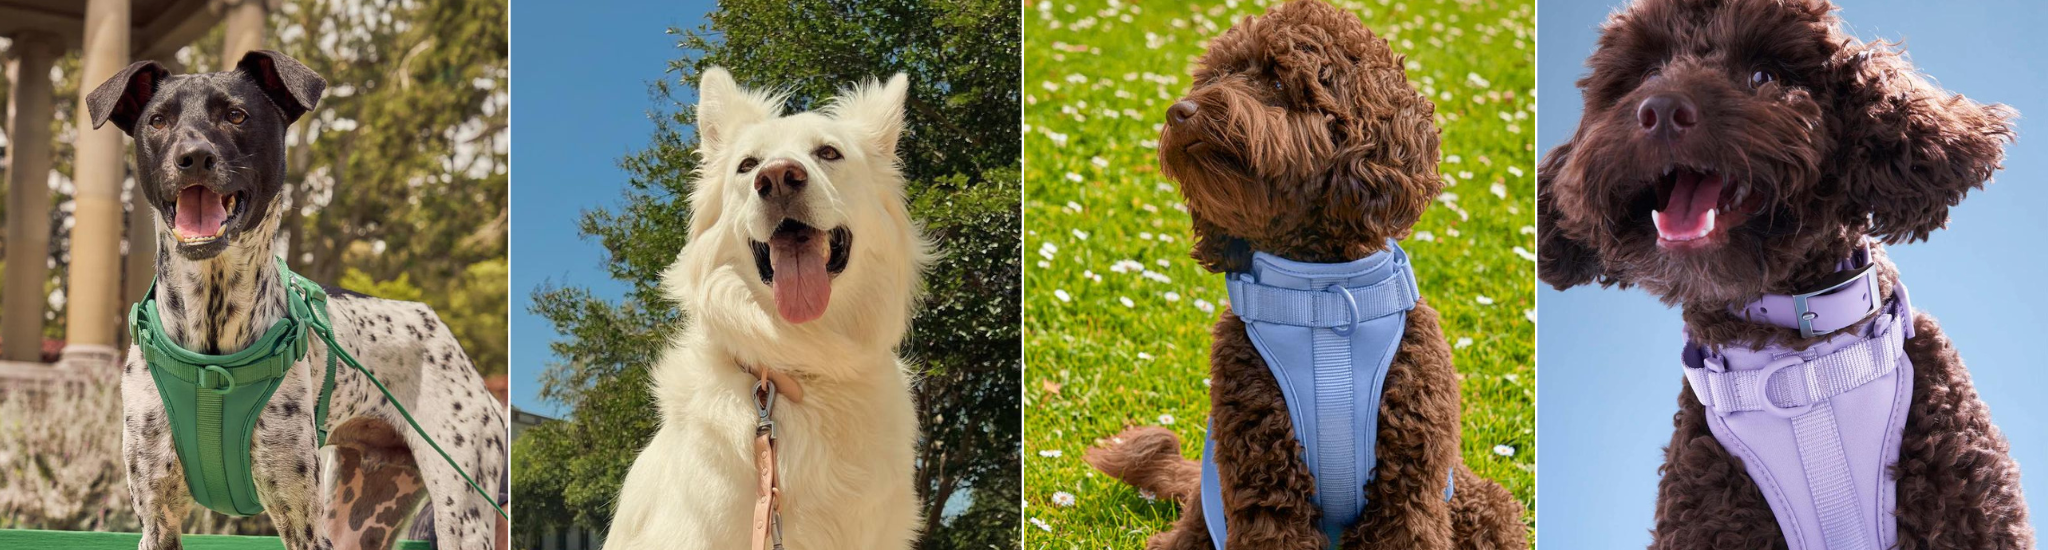 Dog Harness Vs Collars - Wild One - Paws Up Pet Shop